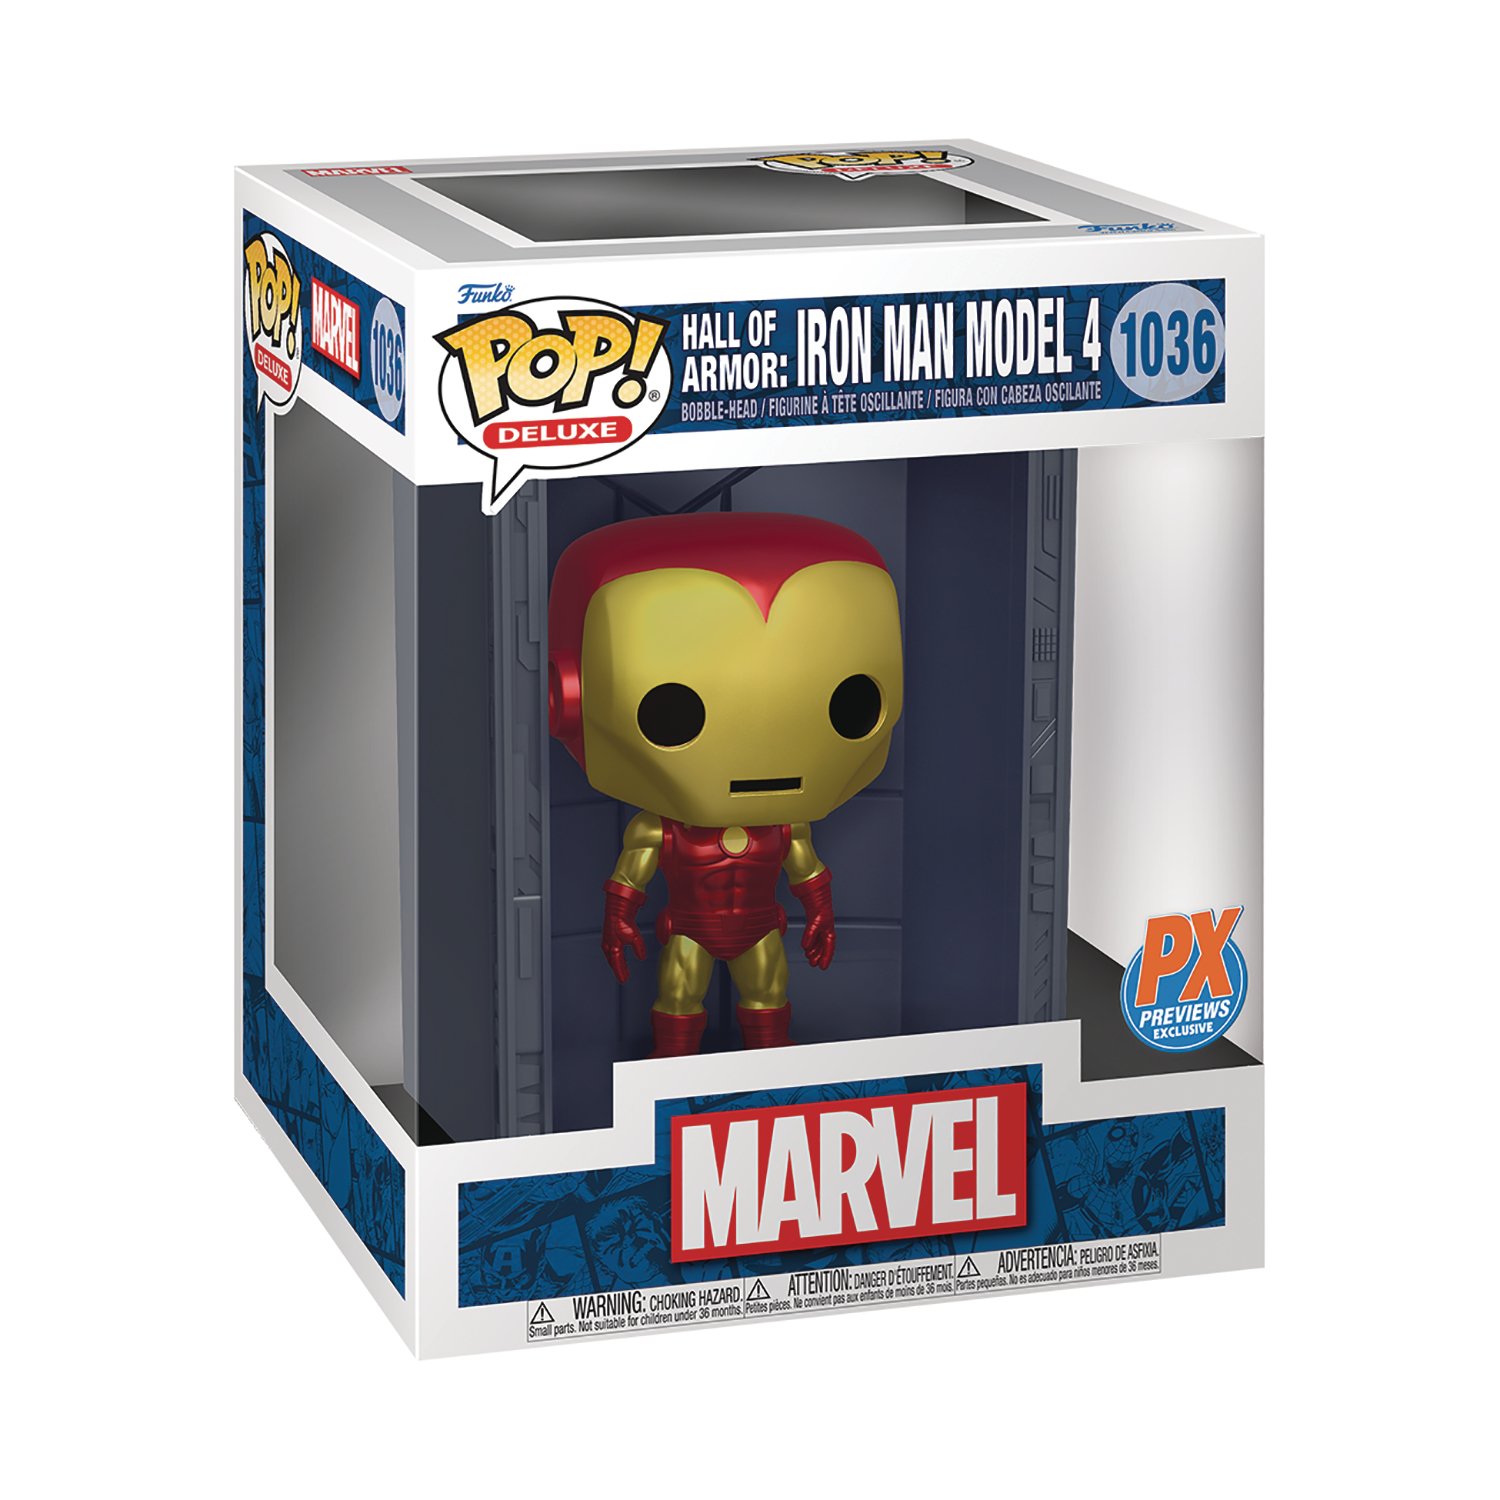 Funko Pop! Deluxe Marvel Hall of Armor Iron Man Model 4 PX Exclusive Figure  #1036 - Legacy Comics and Cards